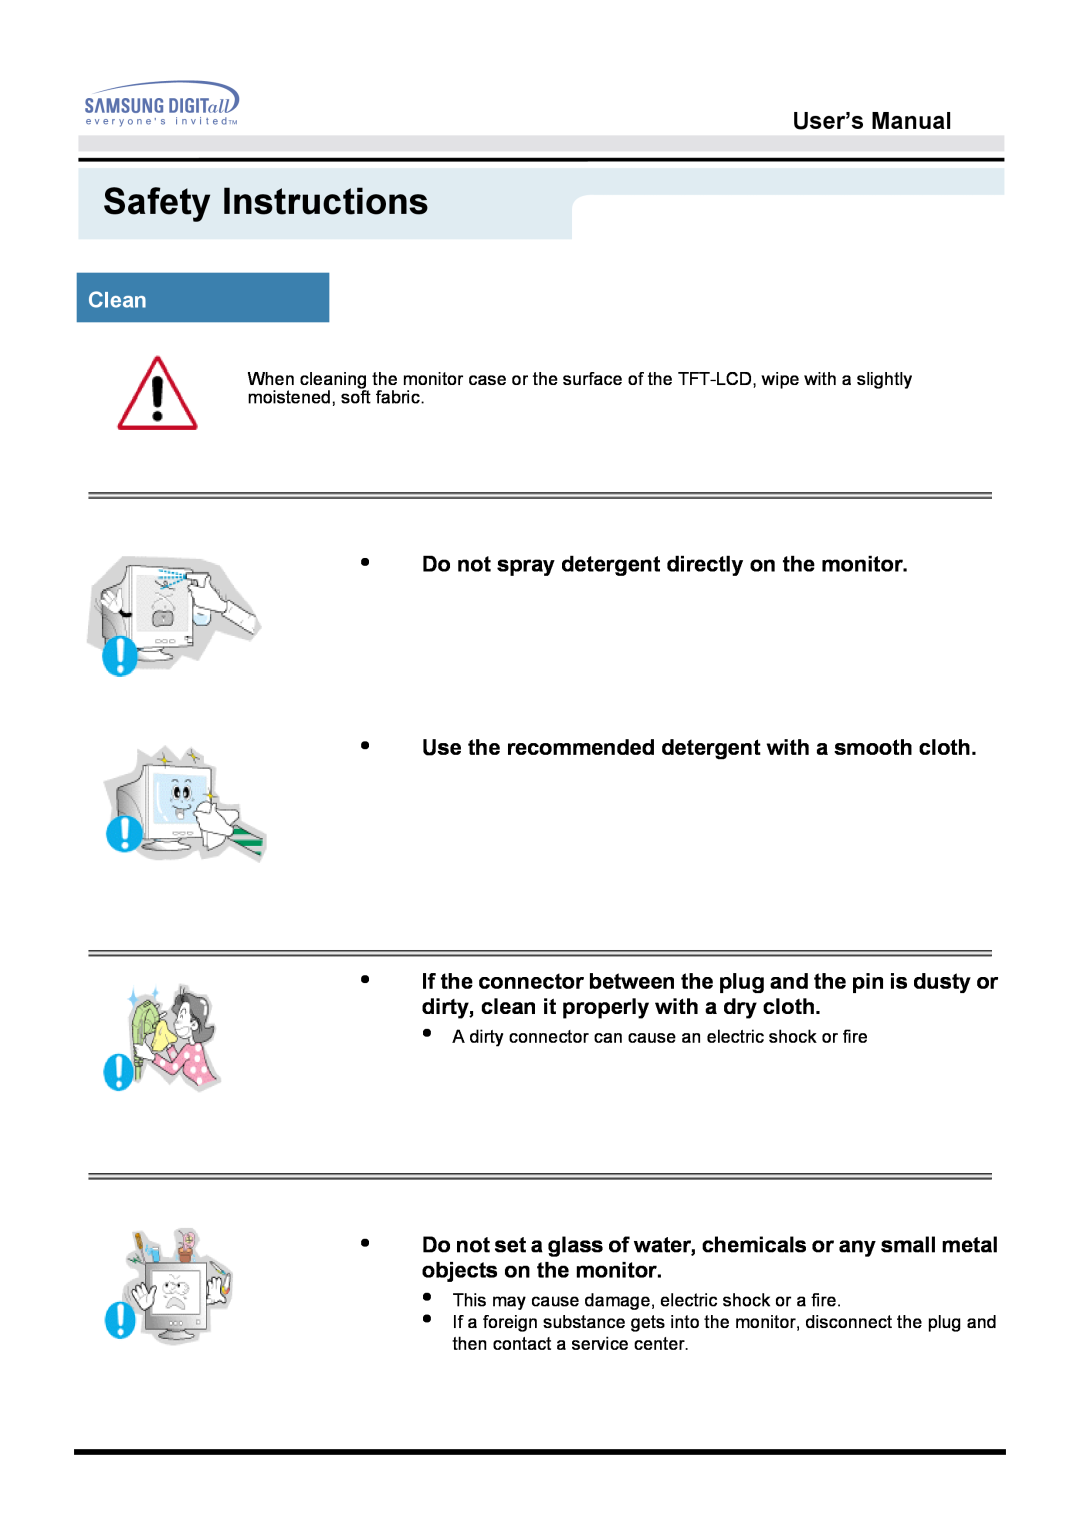 Samsung 151D user manual Clean, Safety Instructions, User’s Manual, Do not spray detergent directly on the monitor 